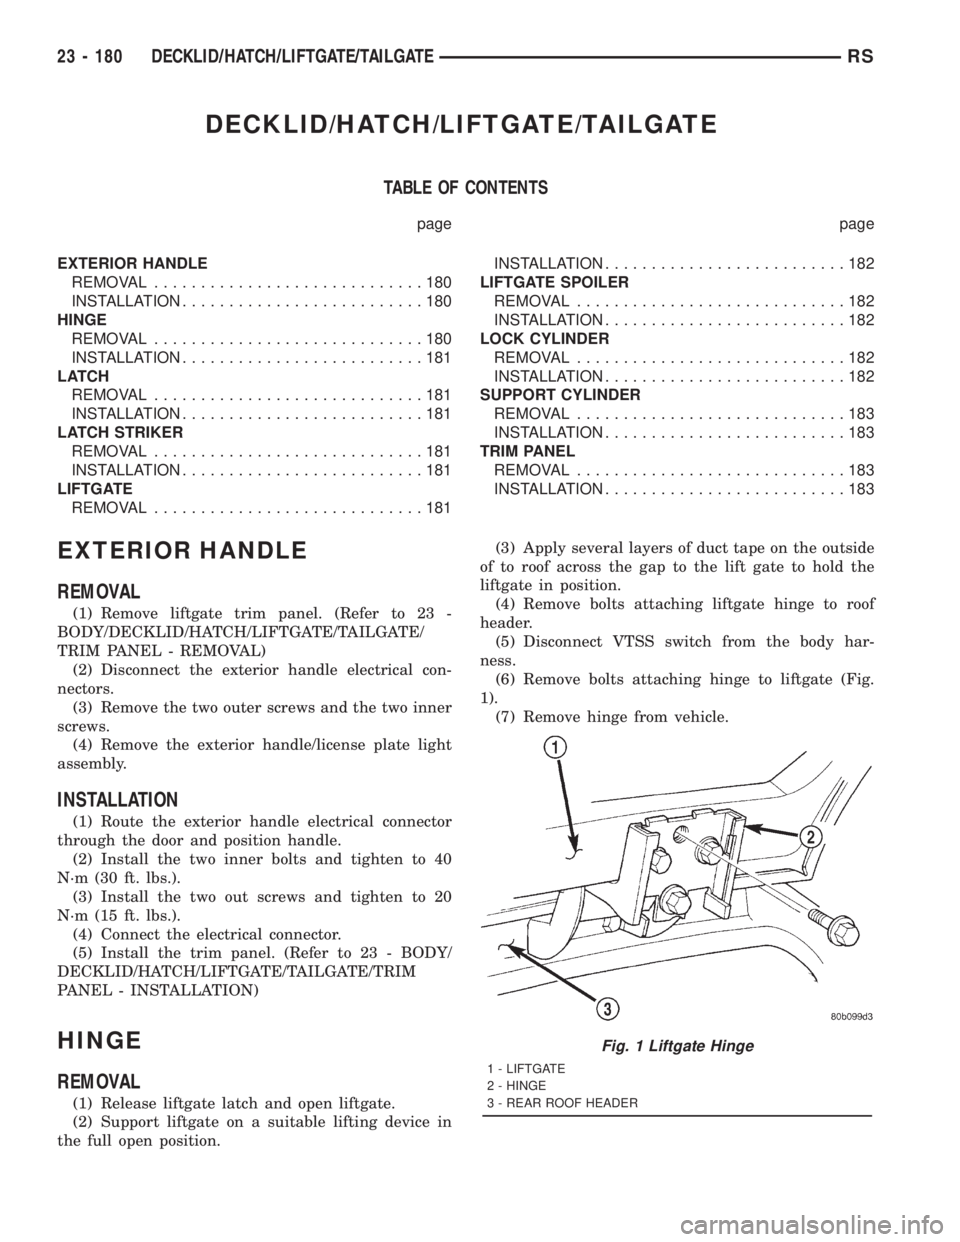 CHRYSLER VOYAGER 2001  Service Manual DECKLID/HATCH/LIFTGATE/TAILGATE
TABLE OF CONTENTS
page page
EXTERIOR HANDLE
REMOVAL.............................180
INSTALLATION..........................180
HINGE
REMOVAL.............................